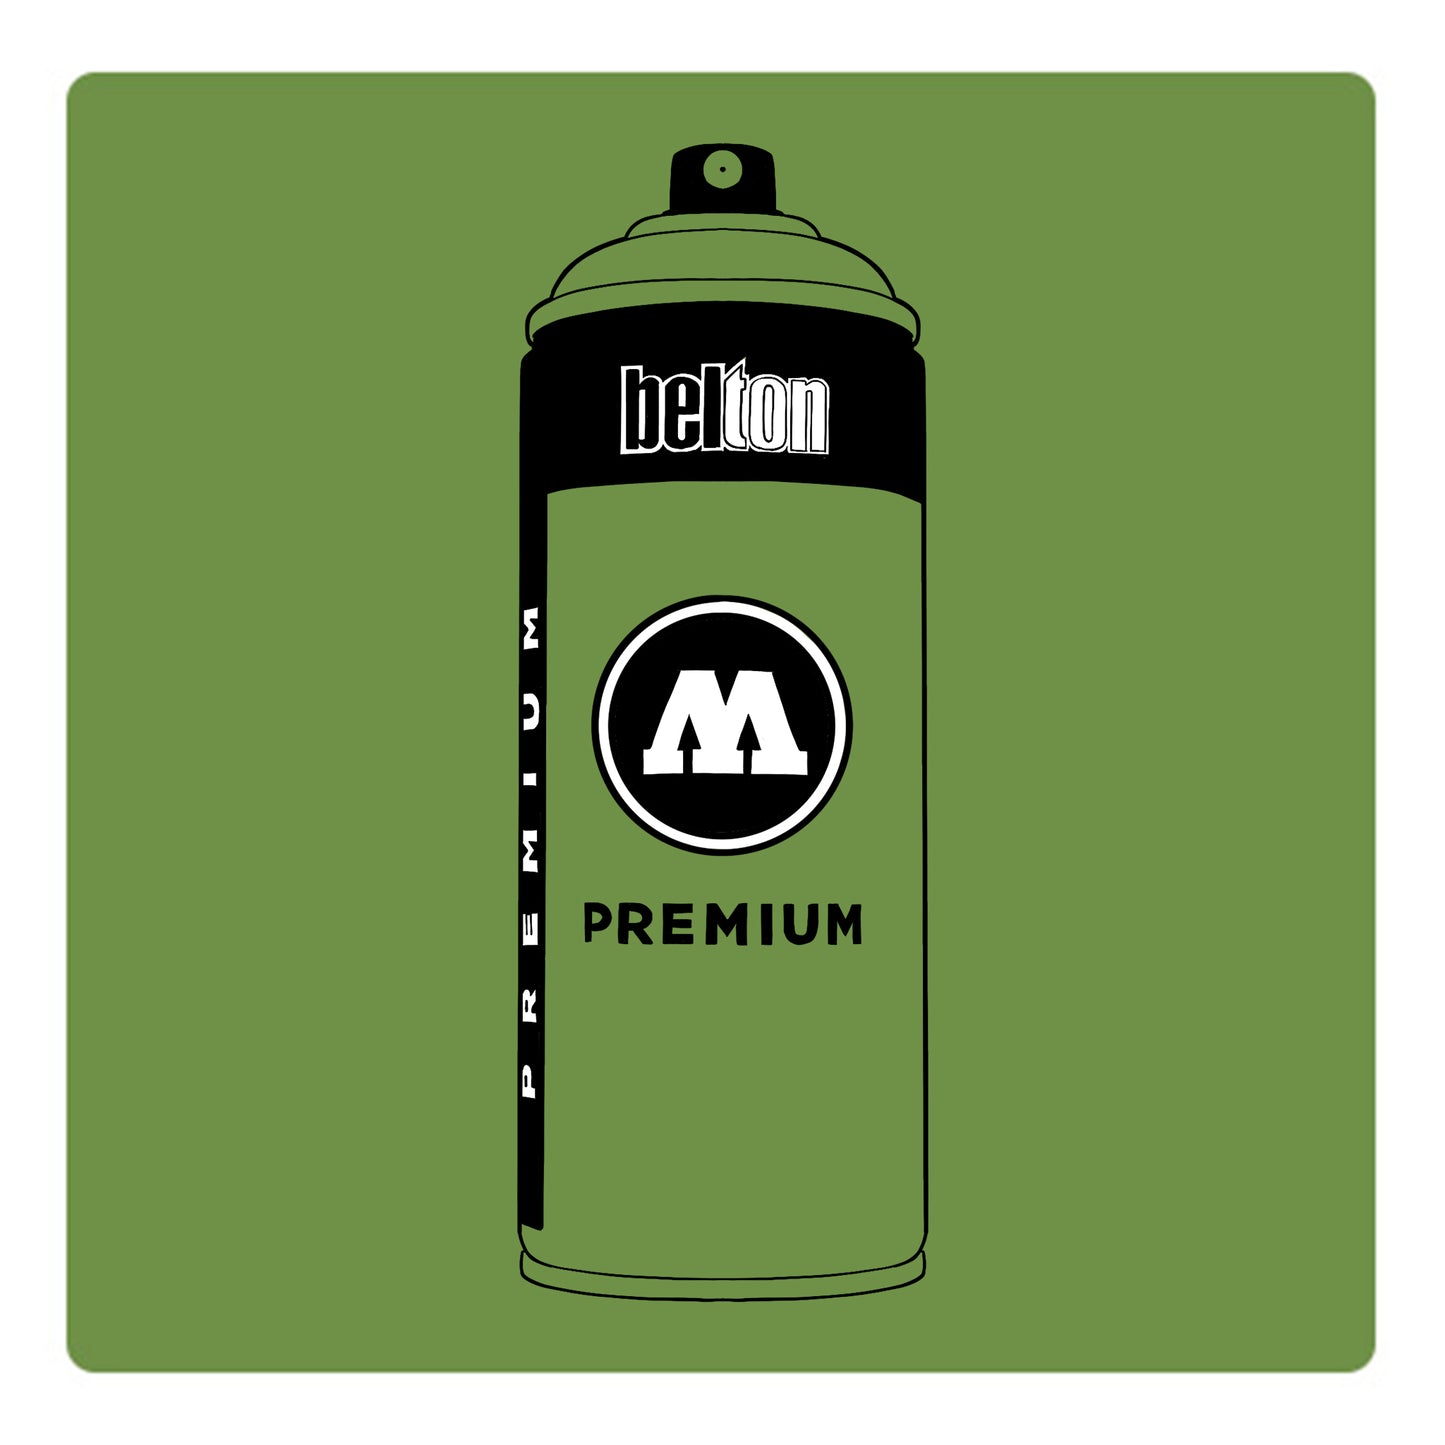 A black outline drawing of a olive green spray paint can with the words "belton","premium" and the letter"M" written on the face in black and white font. The background is a color swatch of the same olive green with a white border